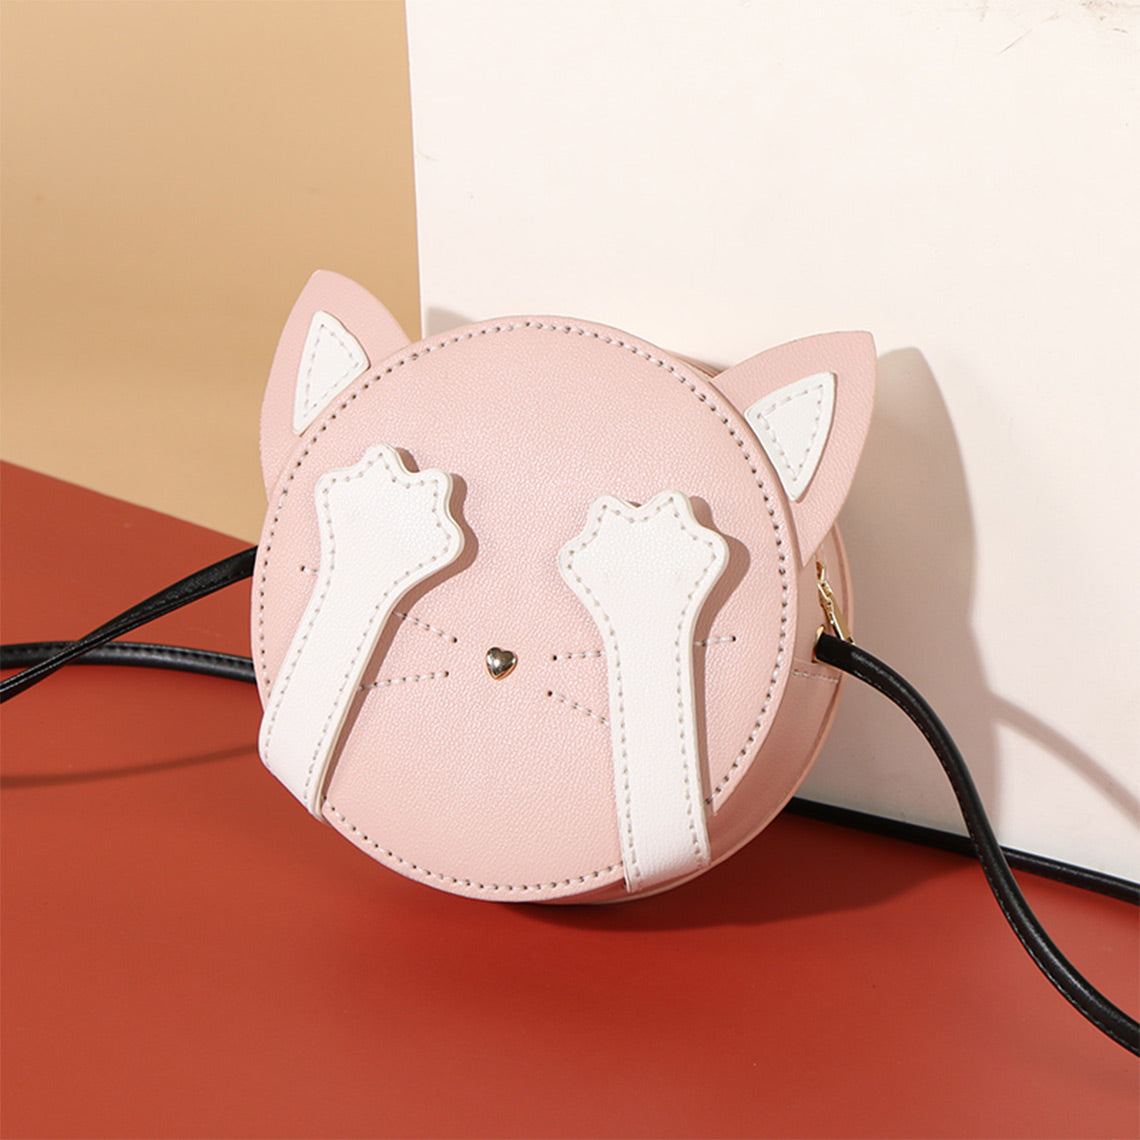 Pink Faux Leather Kid's Cute Kitty Crossbody Bag DIY Kit | Cute Pink Kitty Bag for Kids DIY Birthday Gift Ideas - POPSEWING™